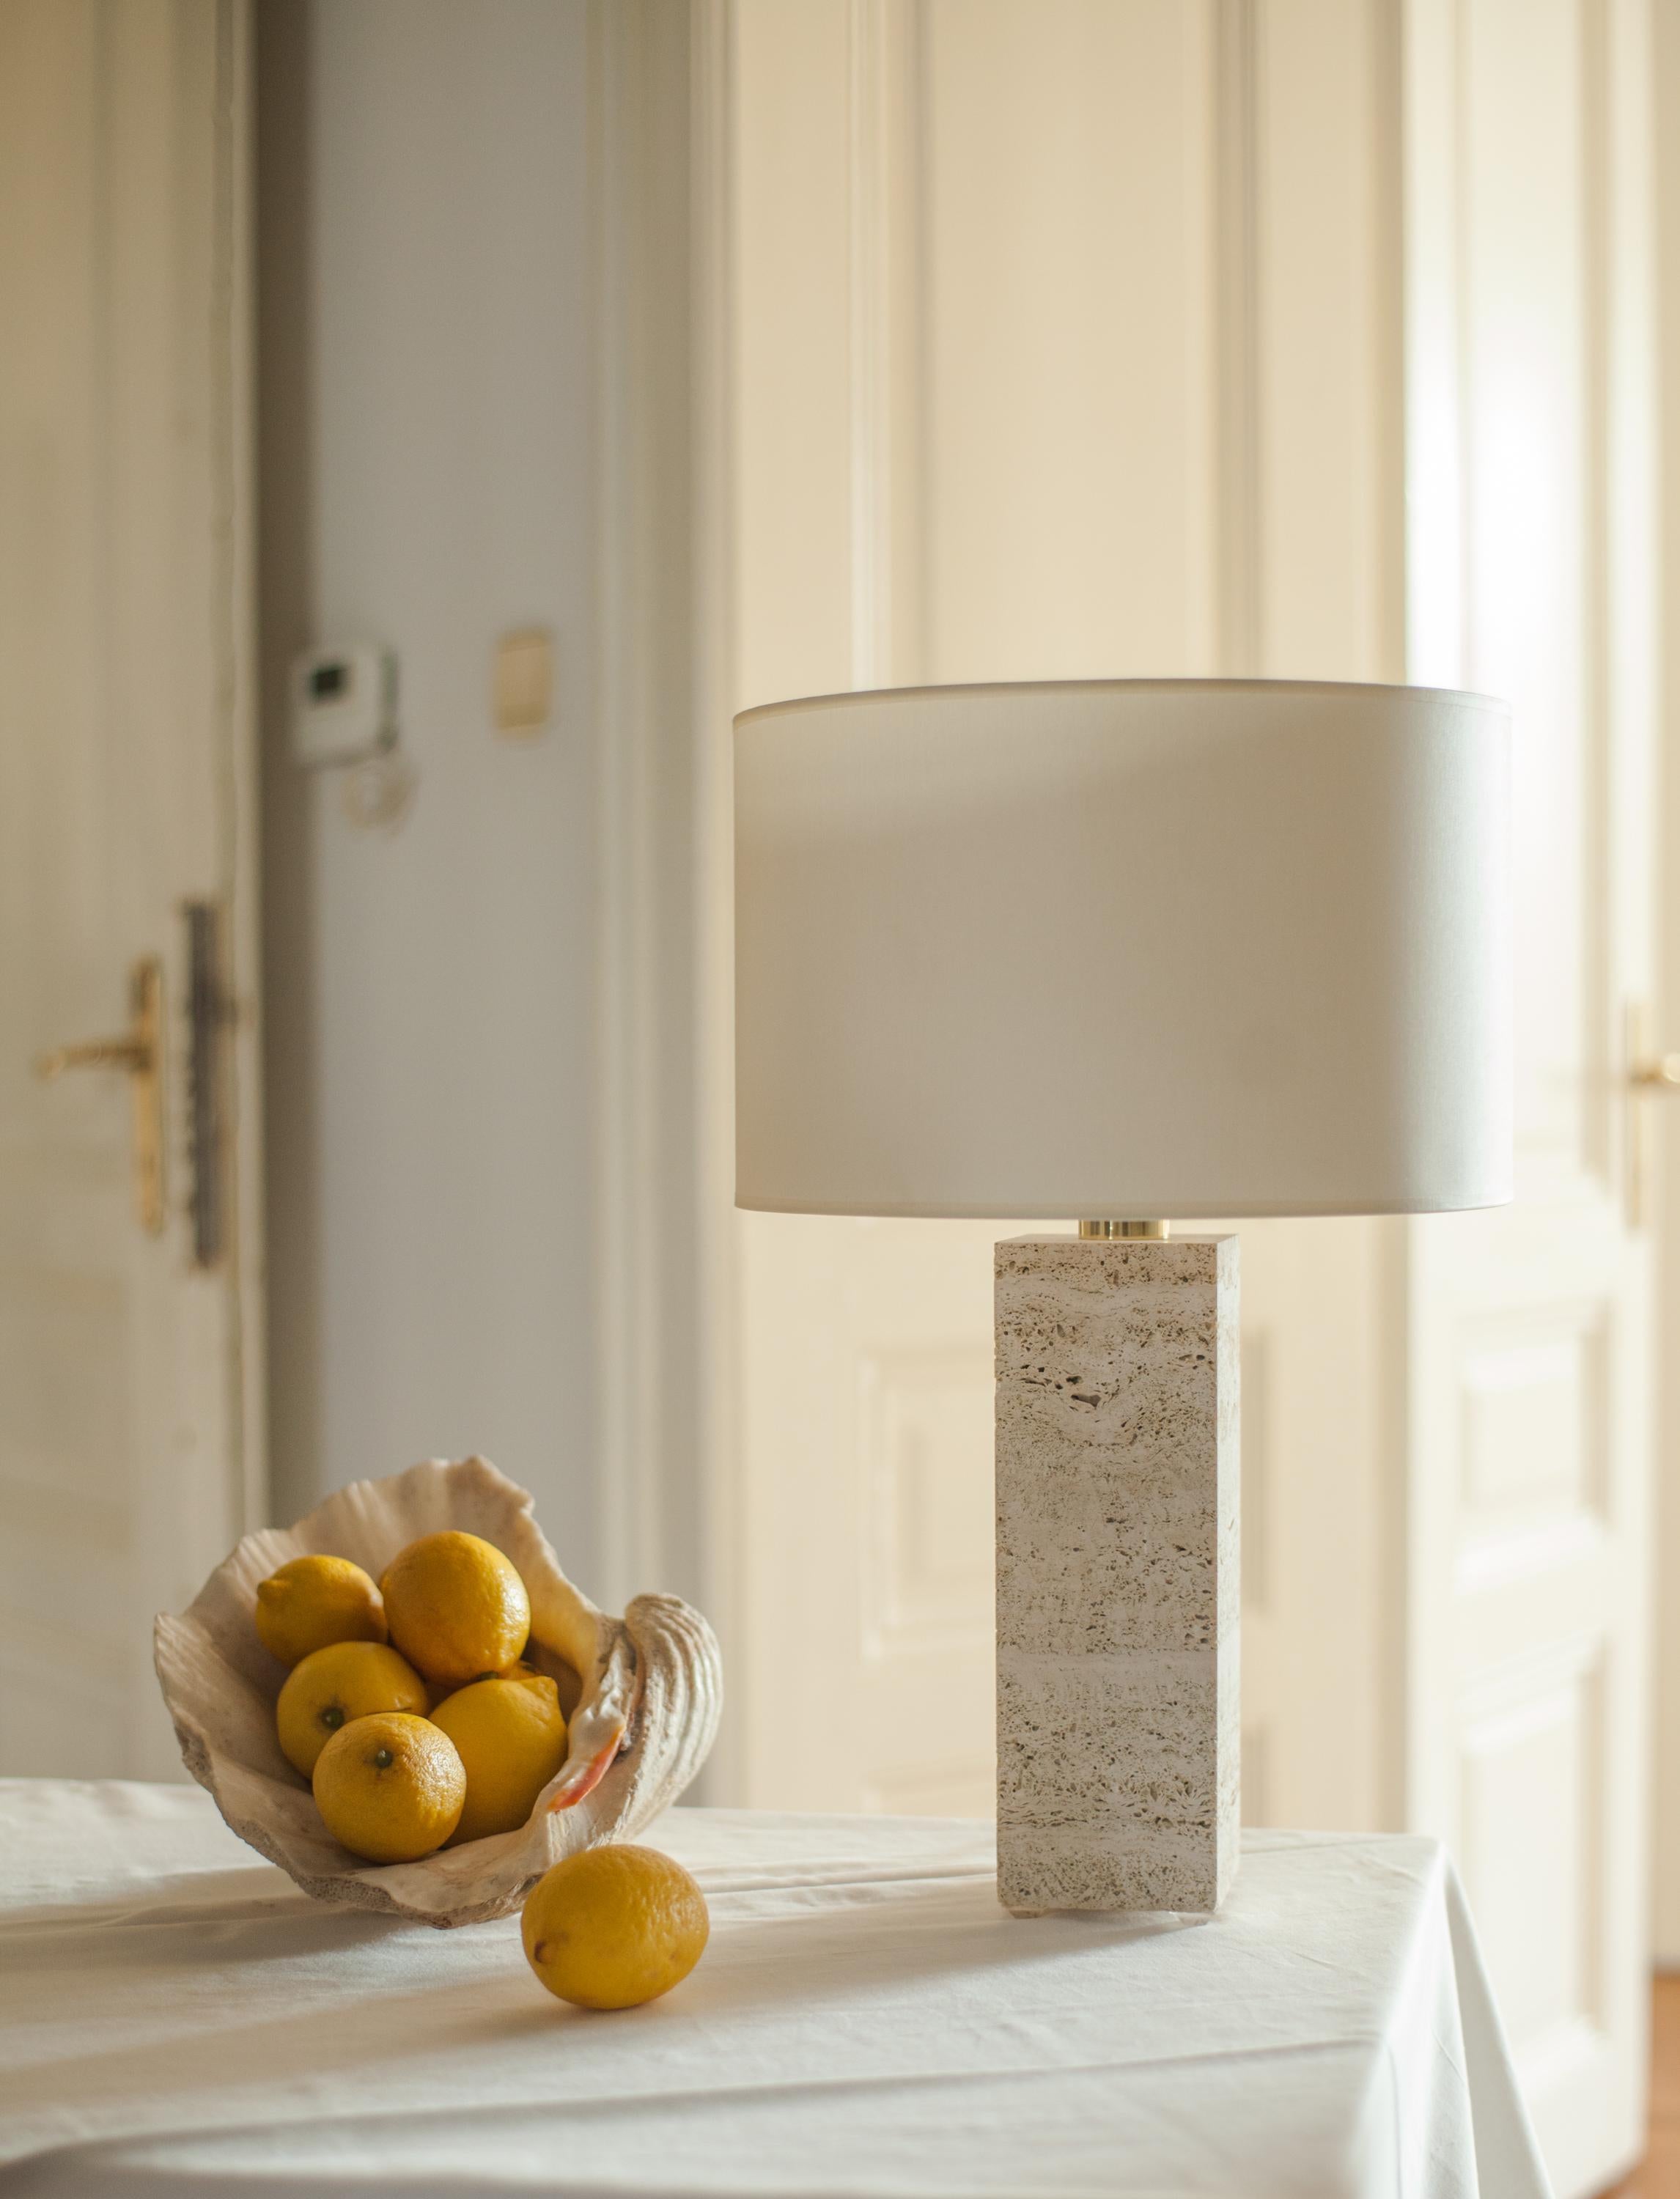 Travertine Sculpted Table Lamp by Brajak Vitberg
Travertine, Polished brass
Dimensions: 52 x 35 x 35 cm
white or black cotton lampshade, cotton wiring


Bijelic and Brajak are two architects from Ljubljana, Slovenia.
They are striving to design